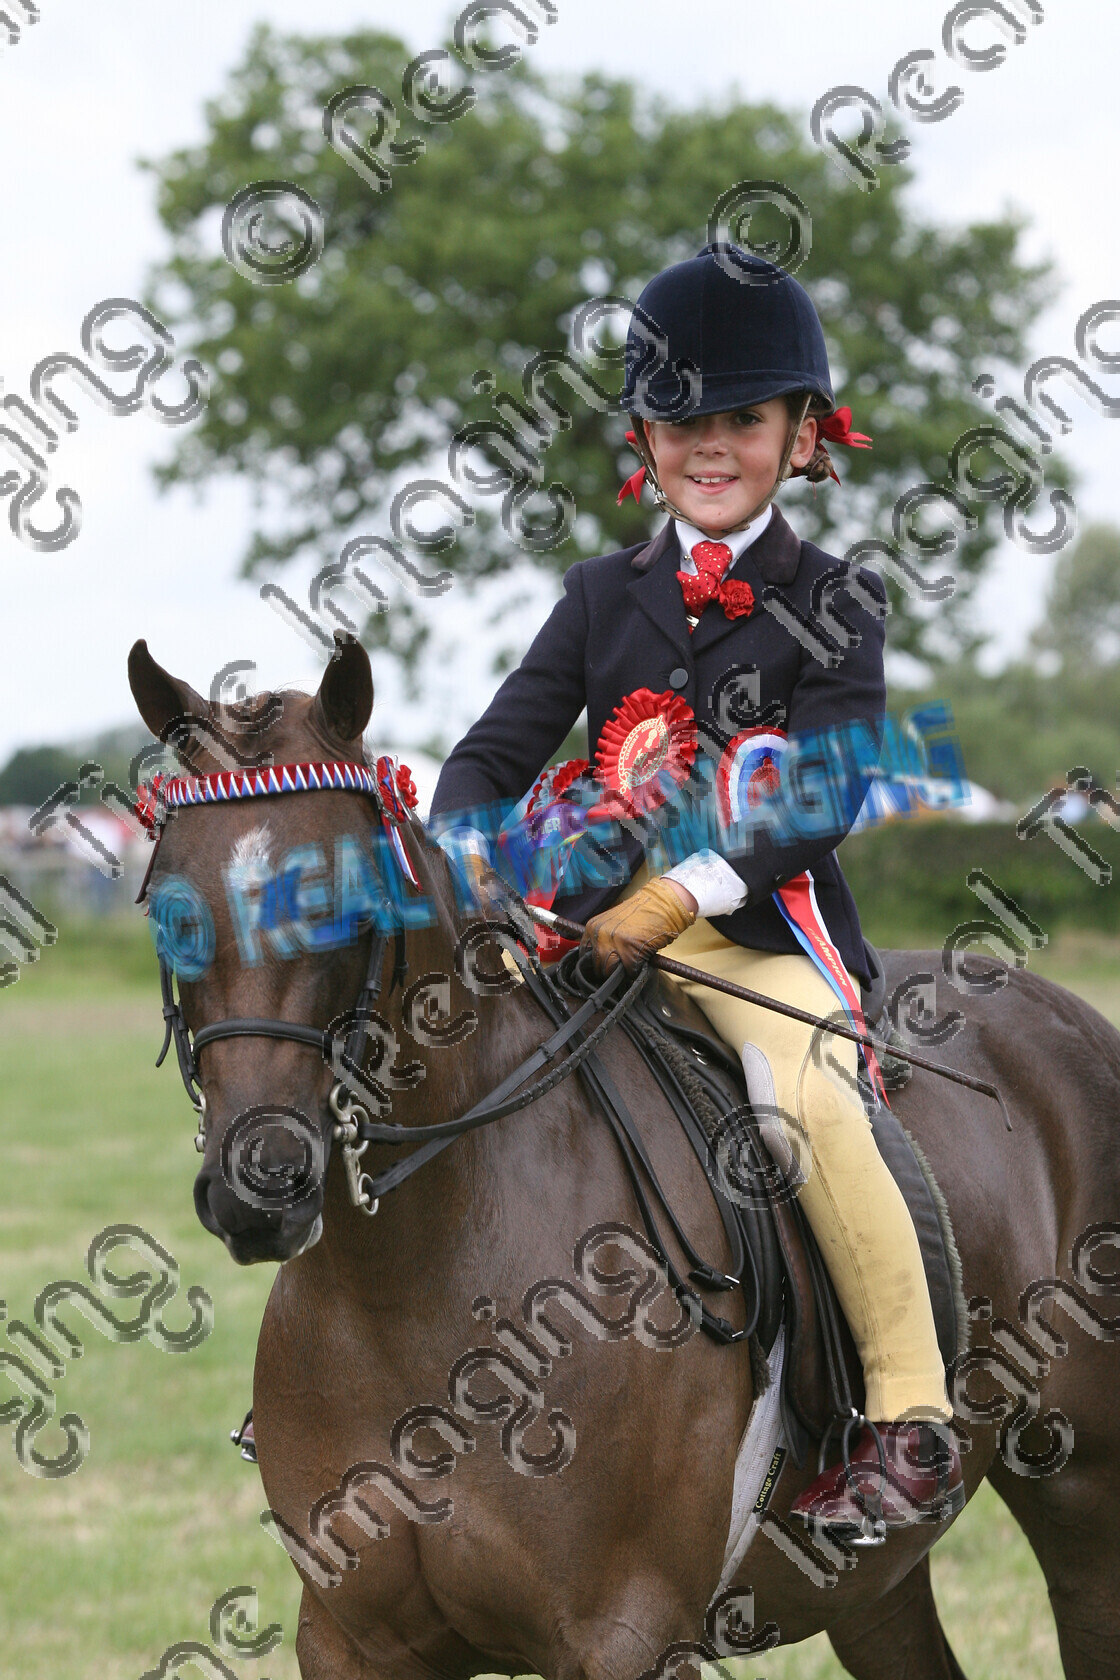 S07-31-5-106 
 Keywords: 1224, KOLBEACH HOLLYS DIAMON, HOYS, Open, Ridden, Show Pony, Championship, Champion, winner win won, `Owner: , Thomas, Mrs D L, `Rider: , Katie roberts, June 2007, Cheshire County Show, Tabley, Knutsford, Cheshire, chestnut, close up, stand, presentation, upright portrait, brow band, child rider, horse pony, sport, Rosette